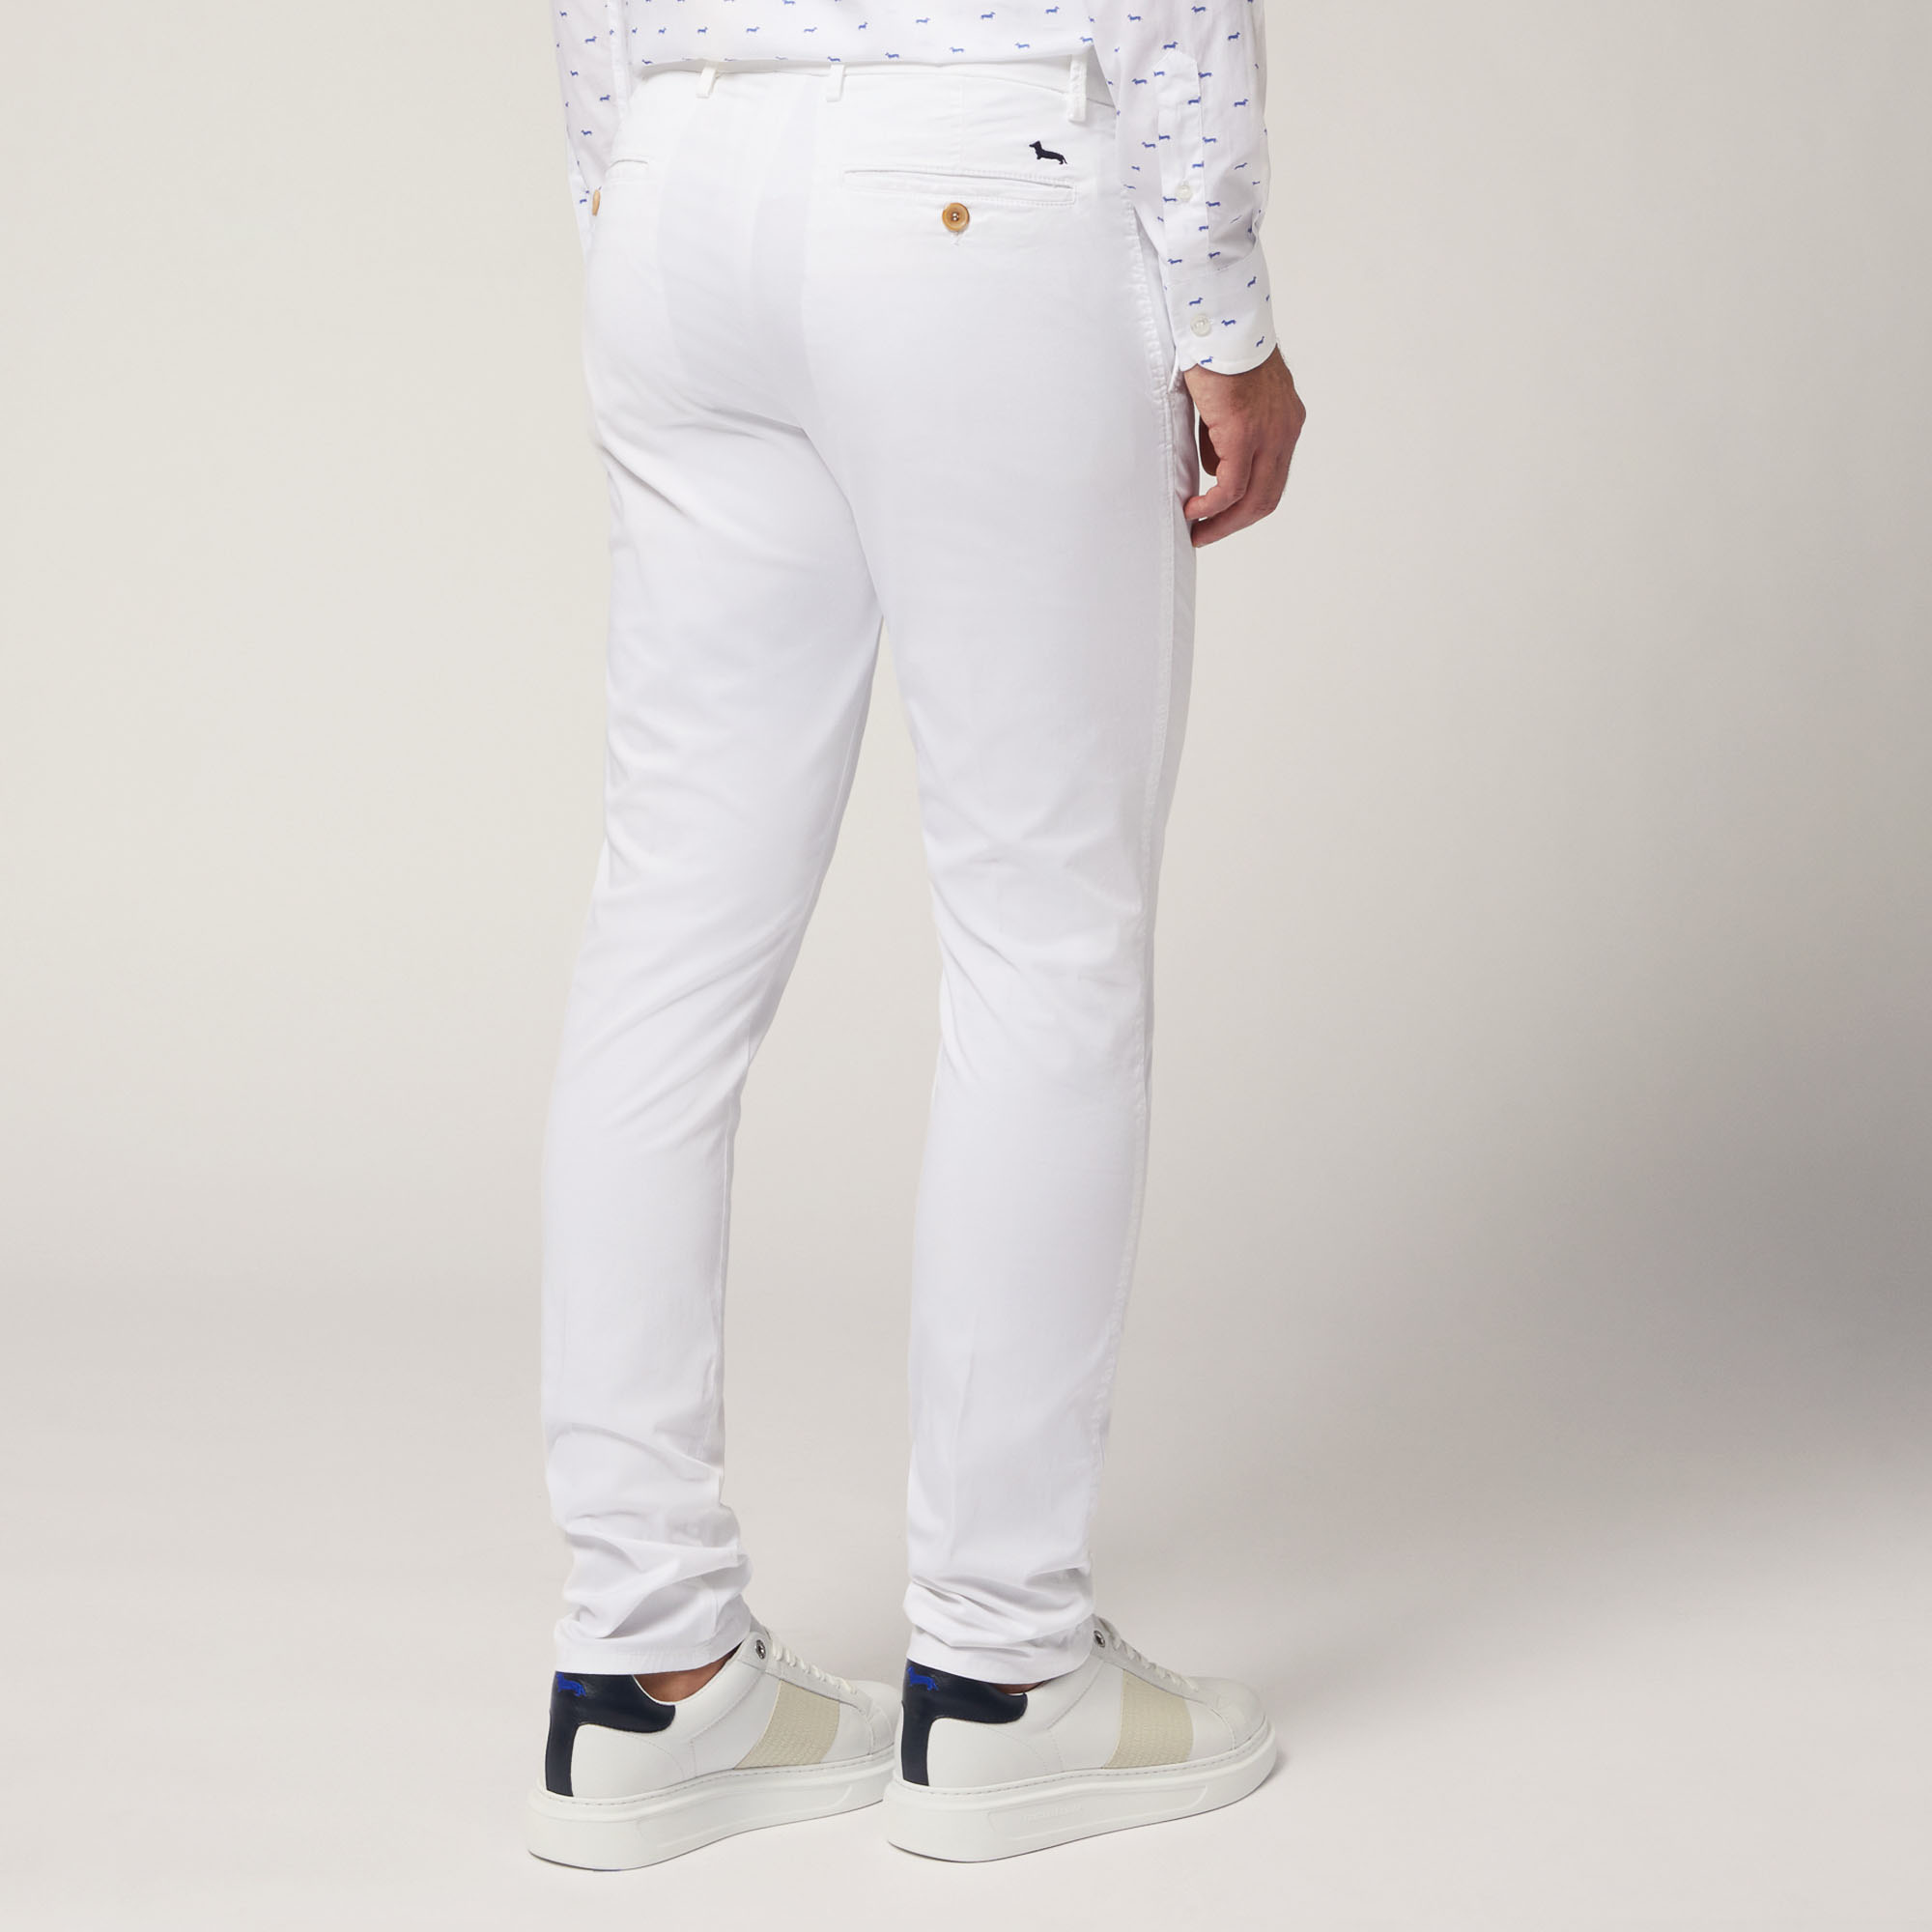 Narrow Fit Chino Pants, White, large image number 1